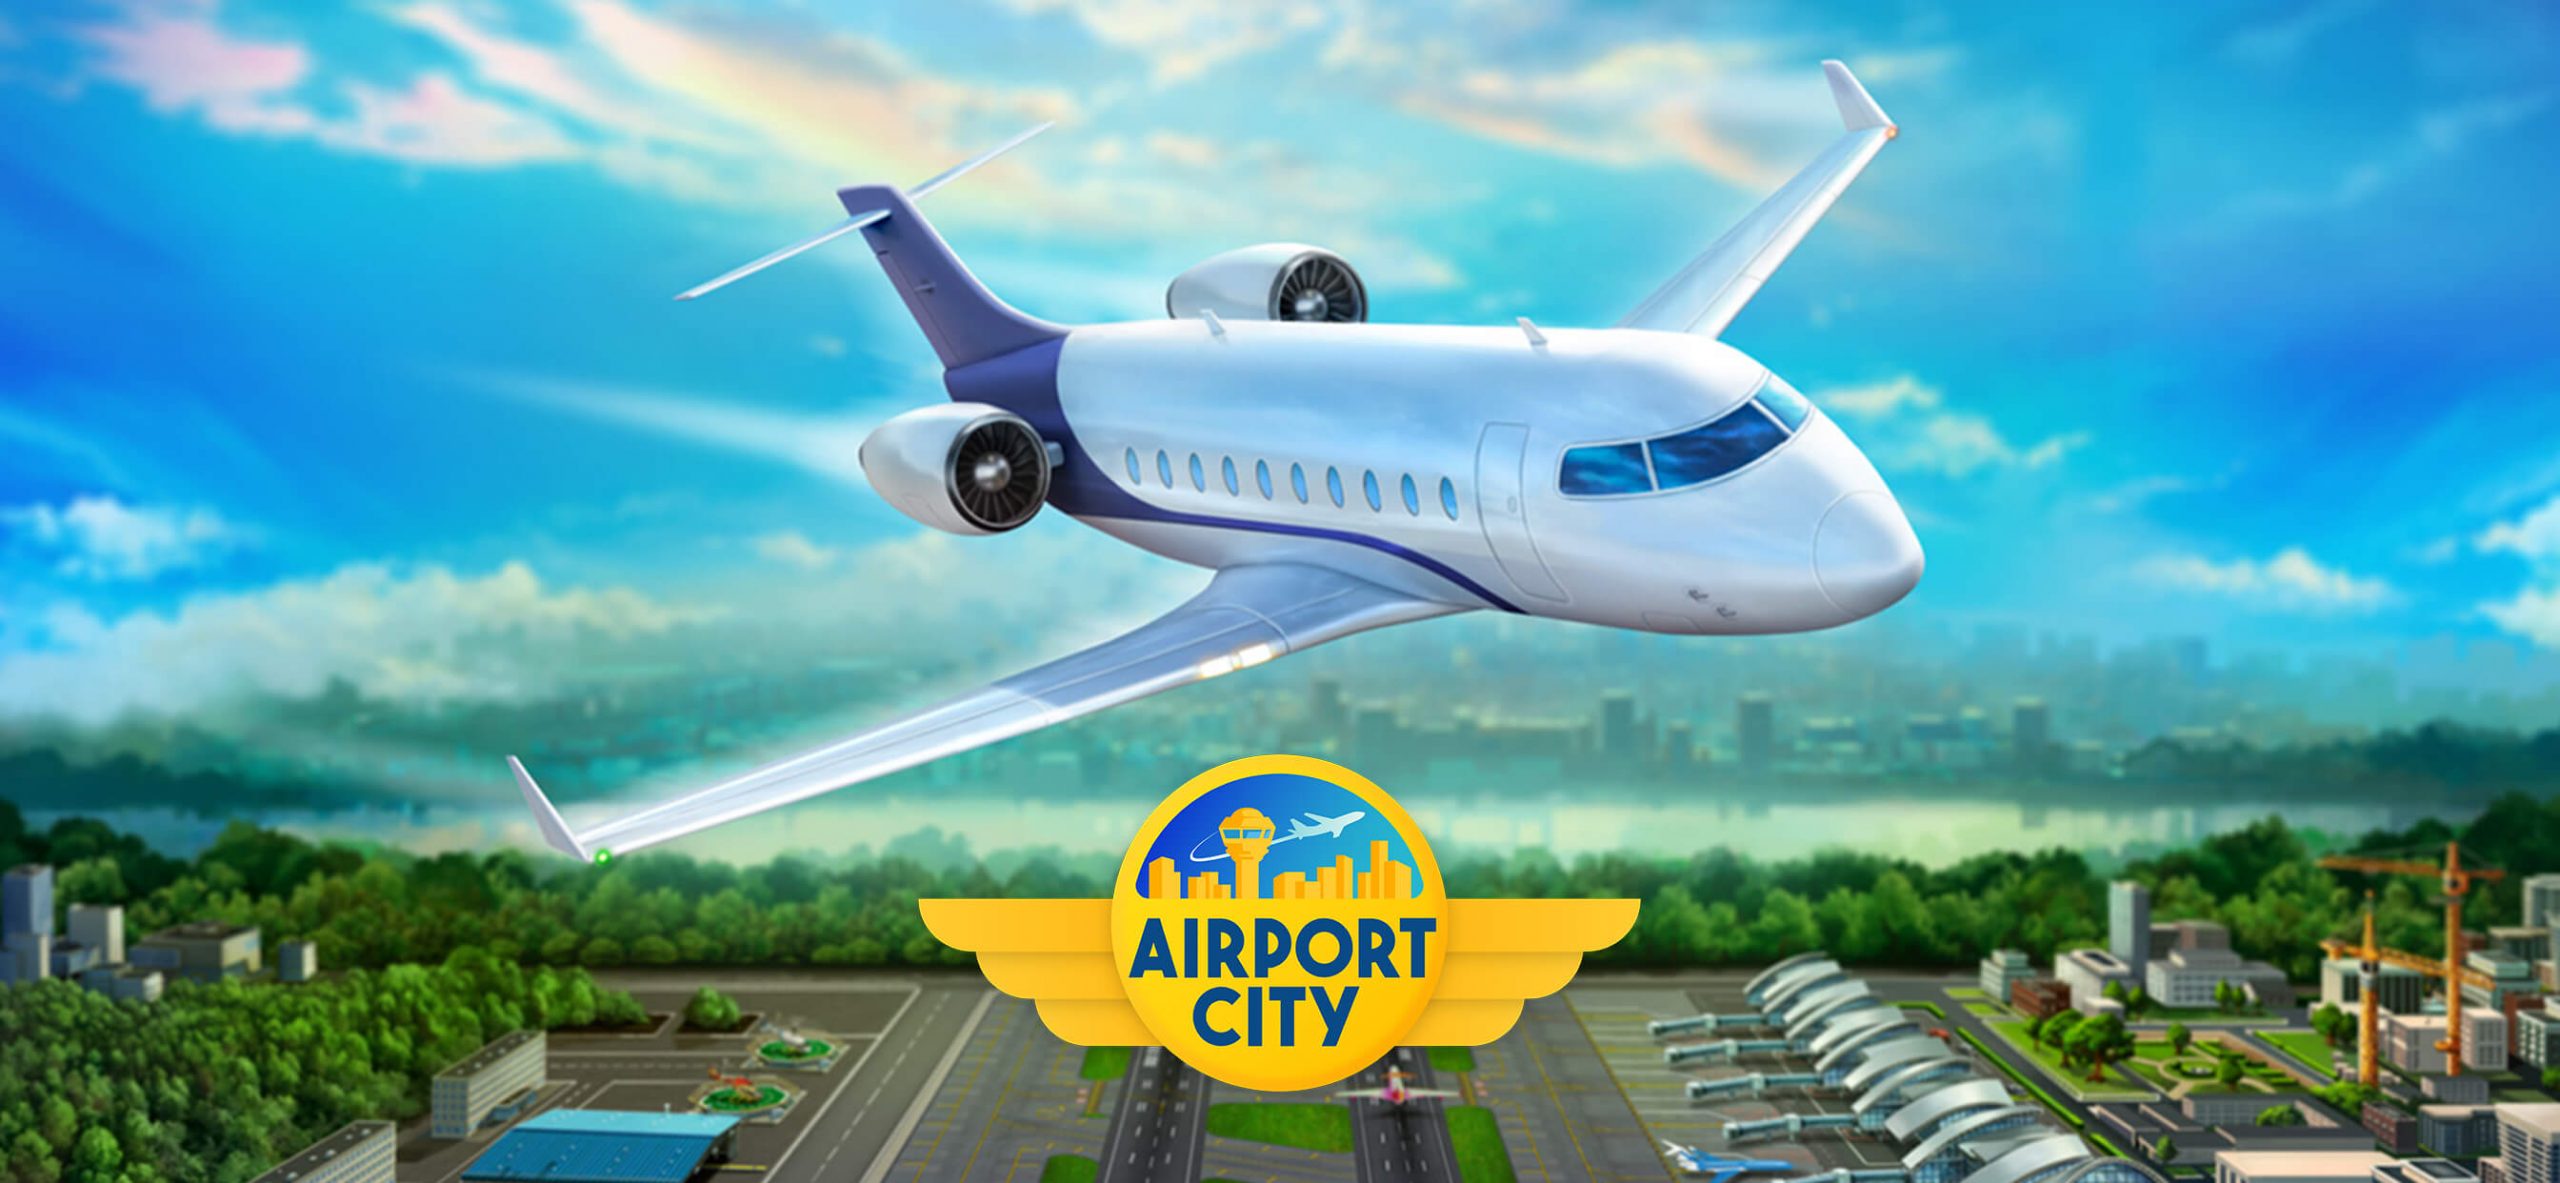 Airport City Mod APk Download For Android (Unlimited Coins/Oil) 2022 2